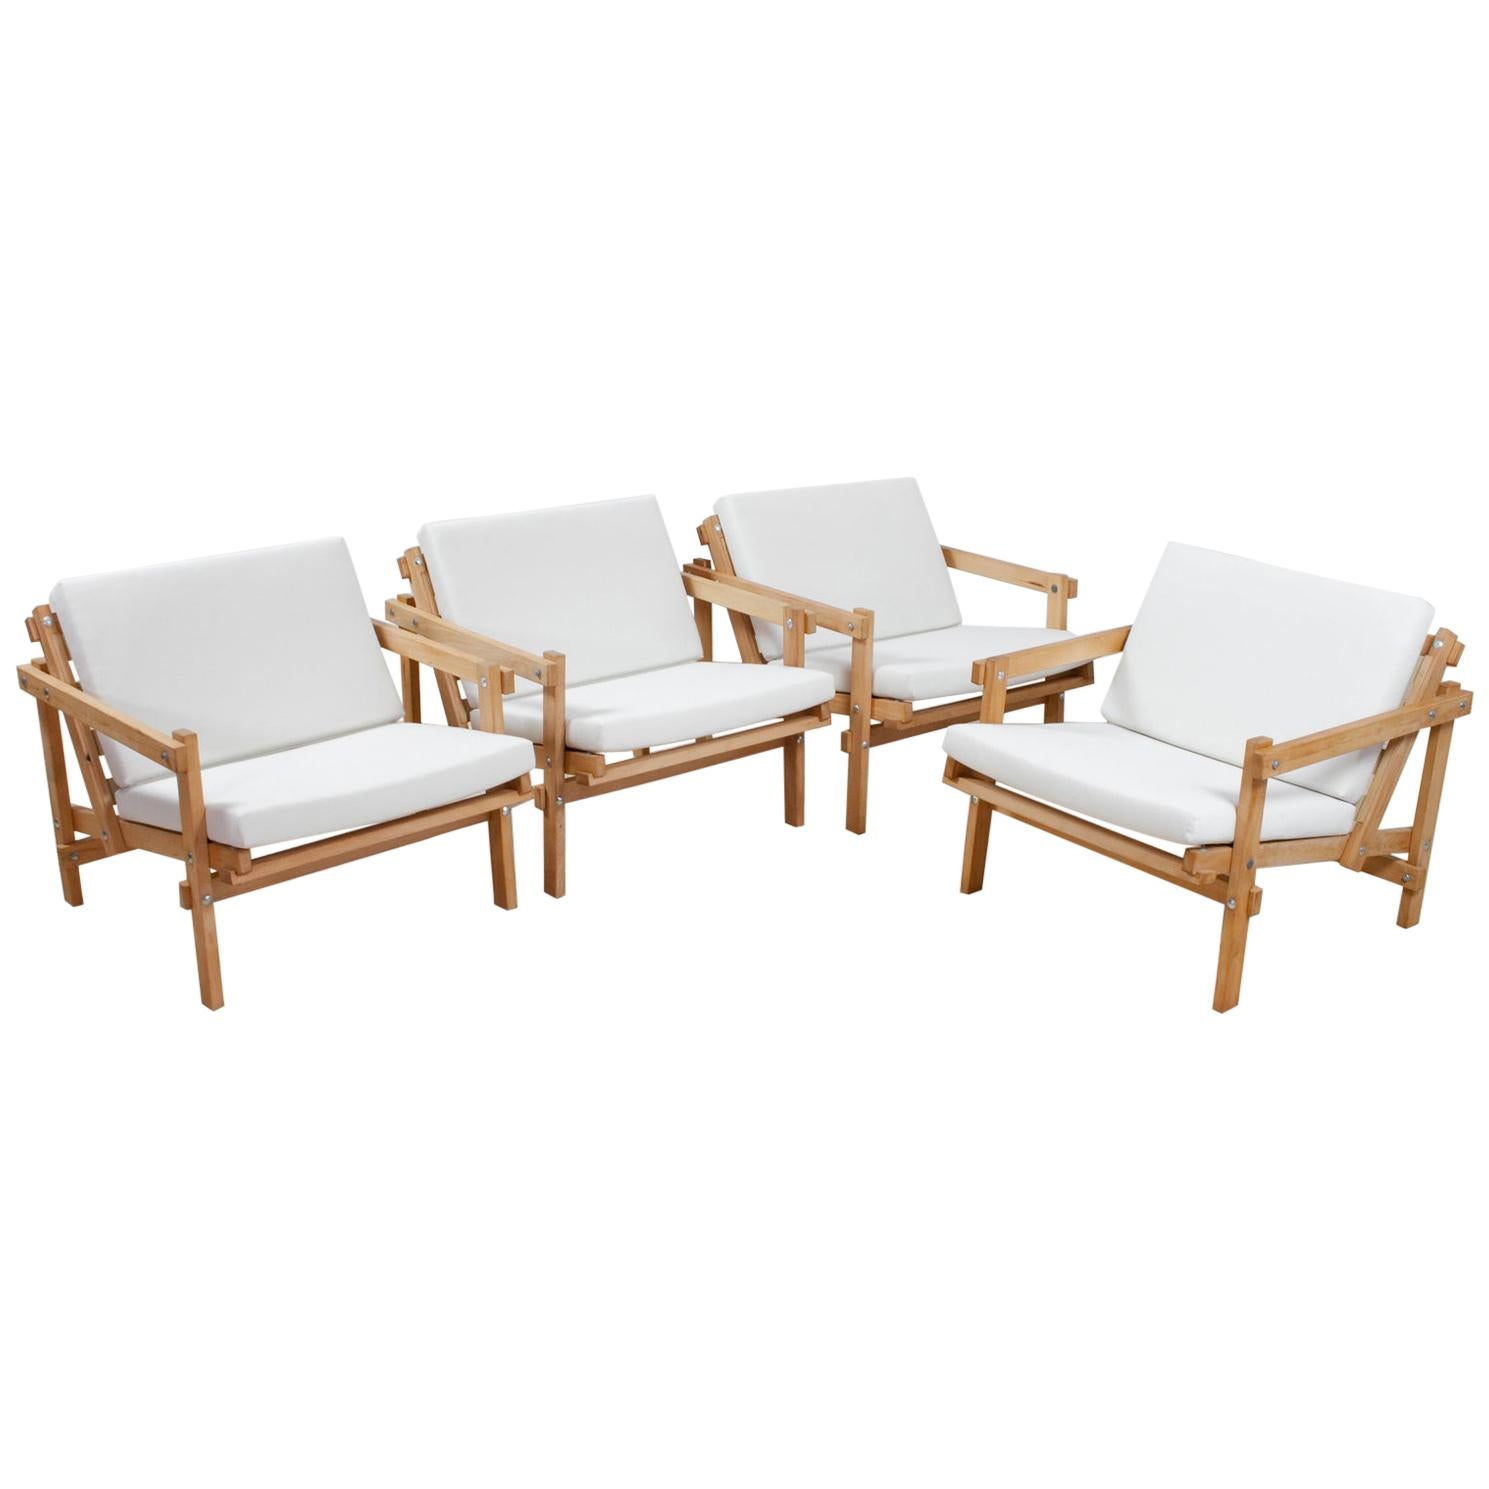 Bauhaus inspired set of 4 Lounge Chairs in Beech by Martin Visser 1974-1986